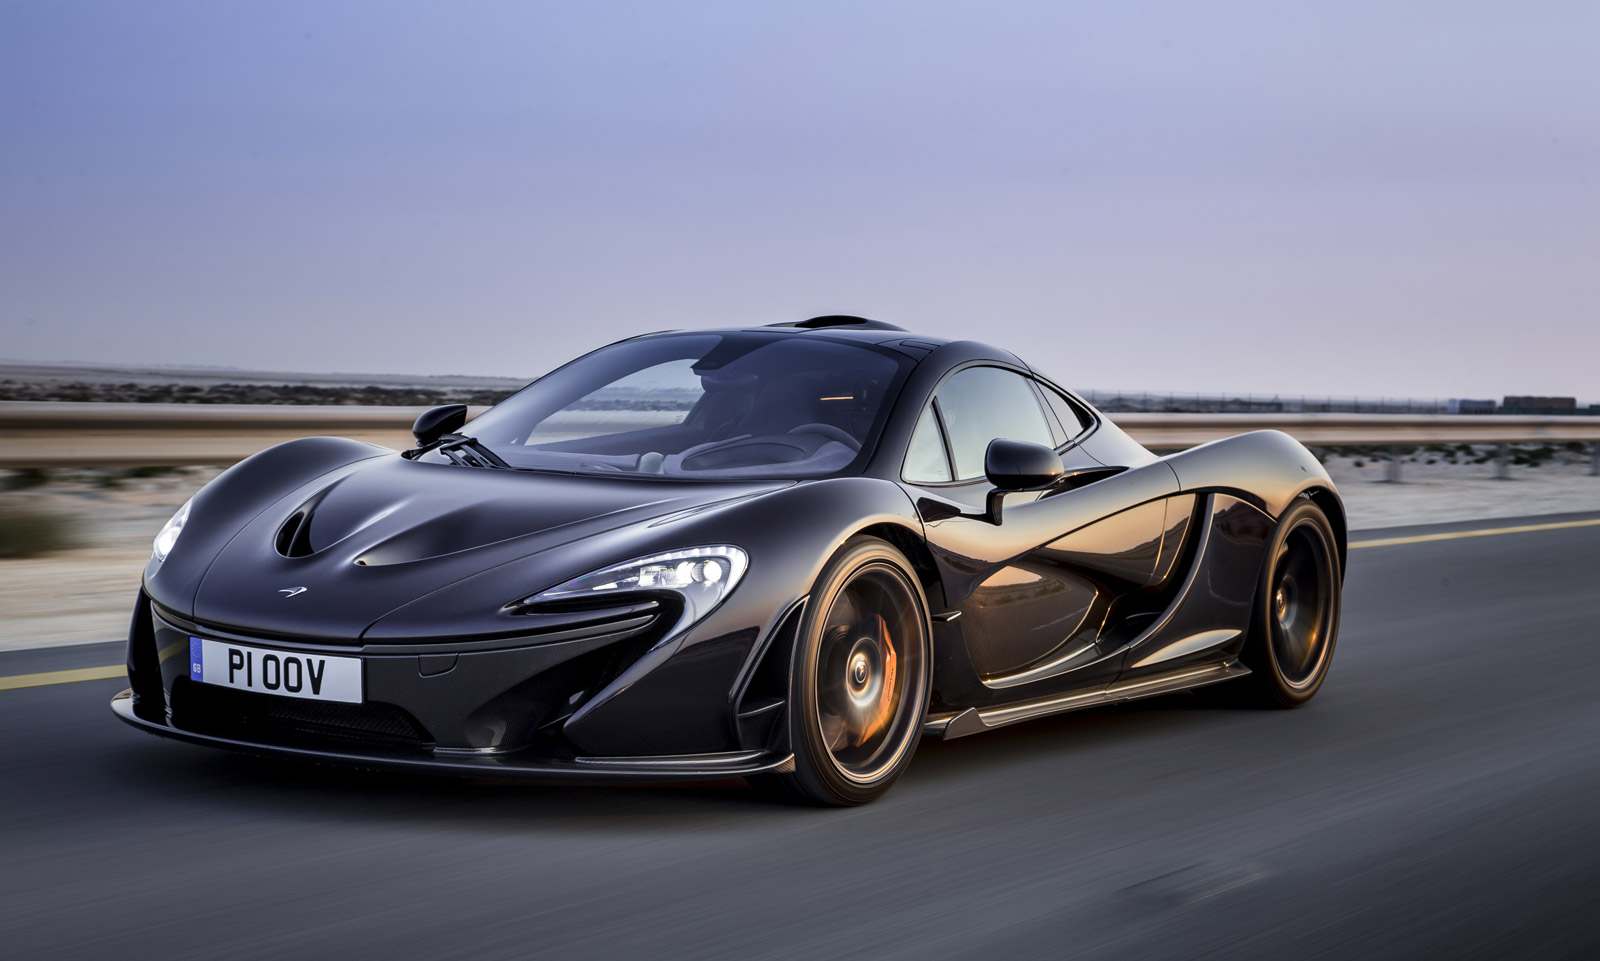 Frank Stephenson explains how a fish inspired part of the McLaren P1's ...